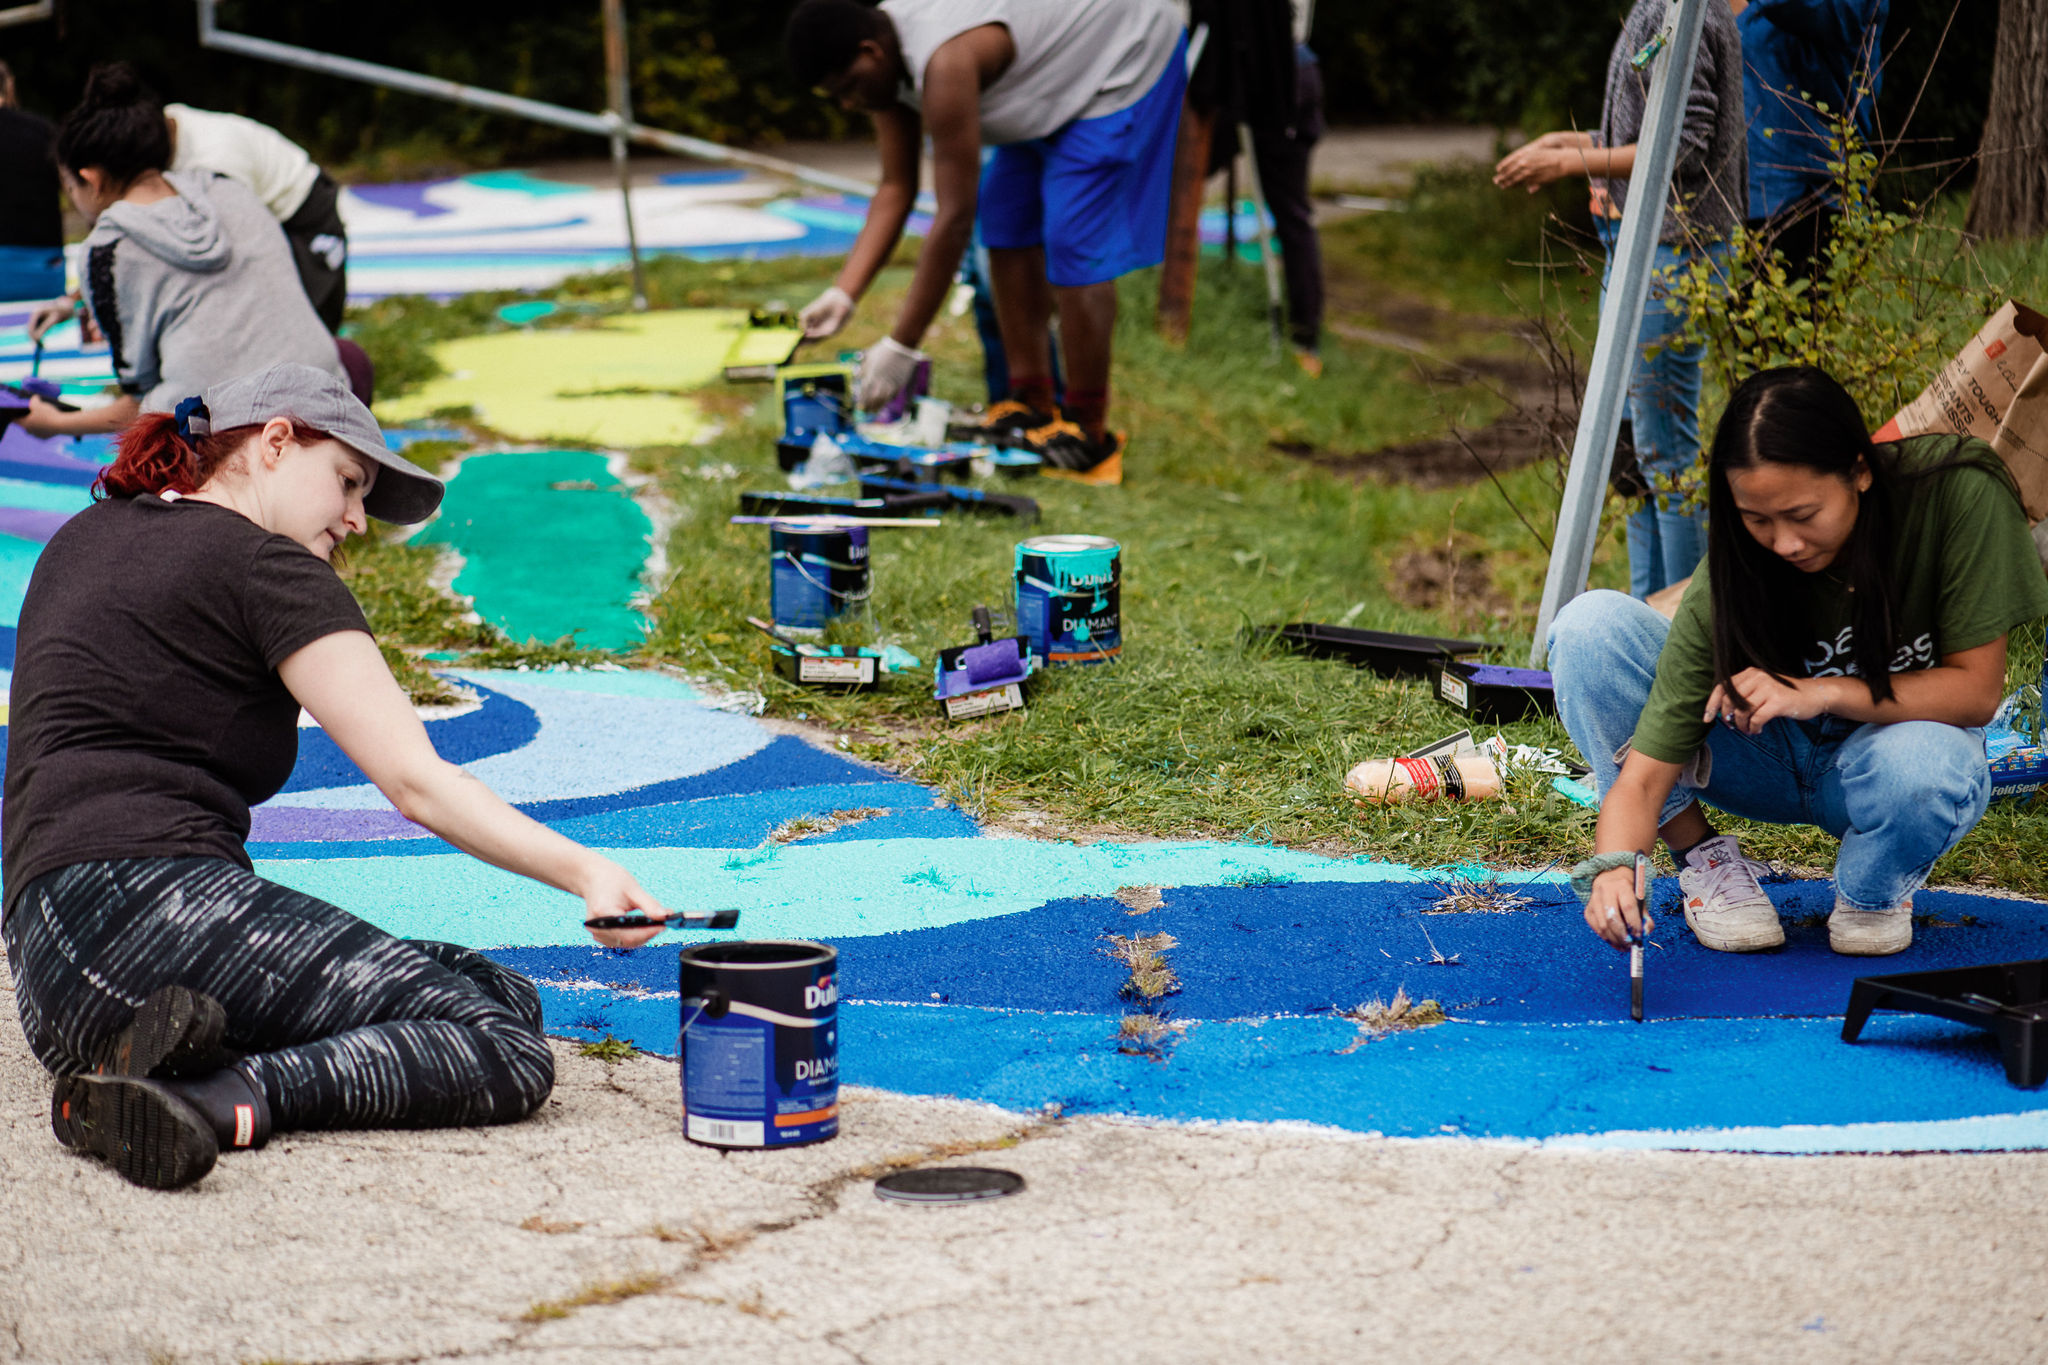 A group of four people sit on the ground and paint the pavement different shades of blue.